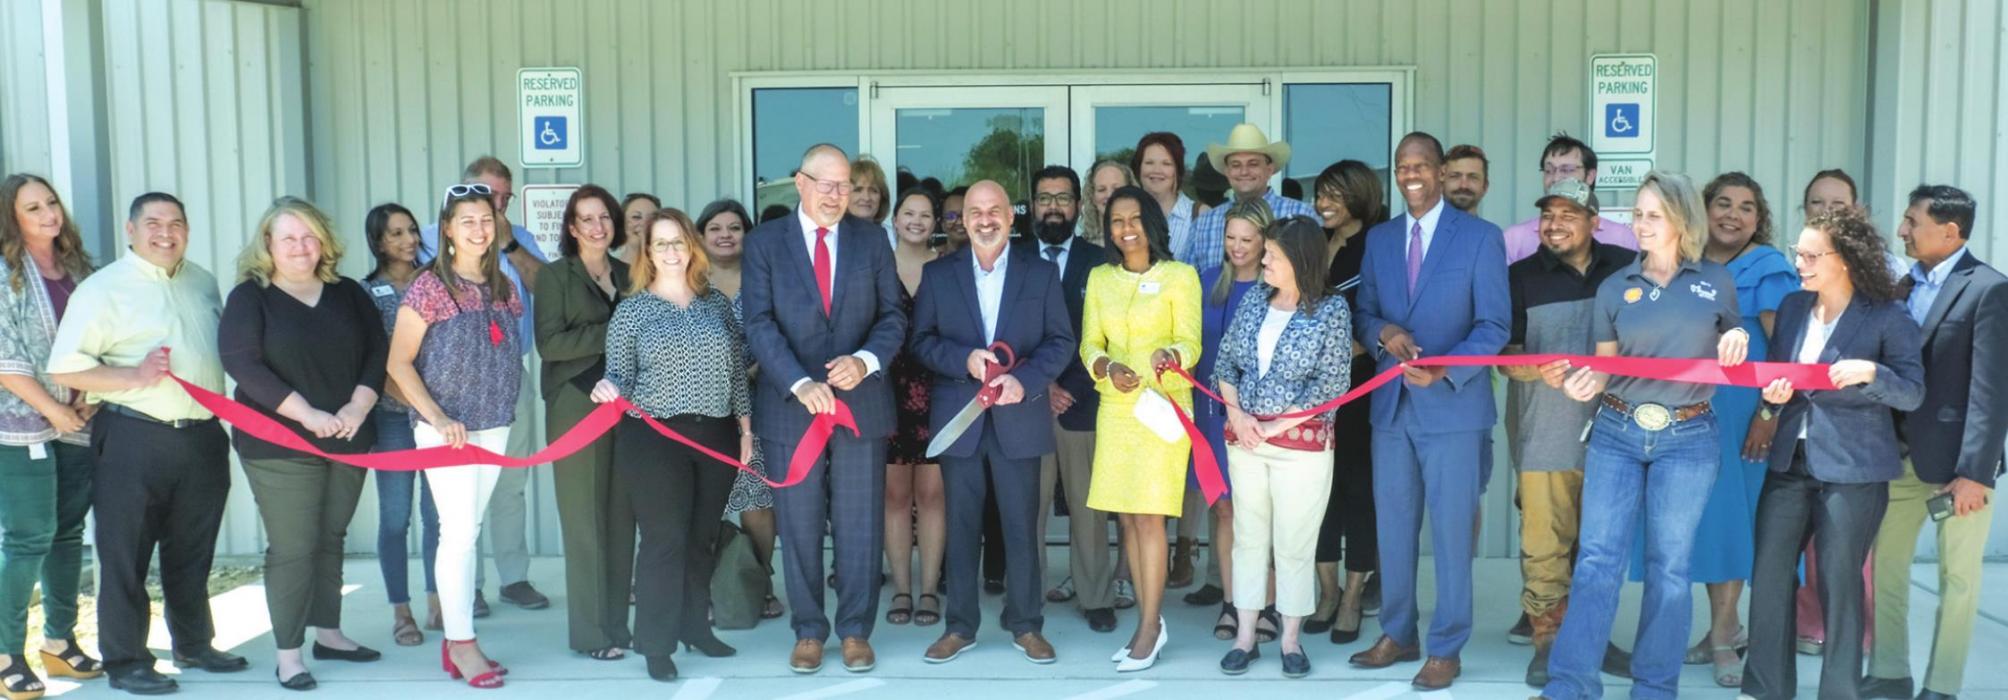 Workforce Solutions Celebrates New LG Facility